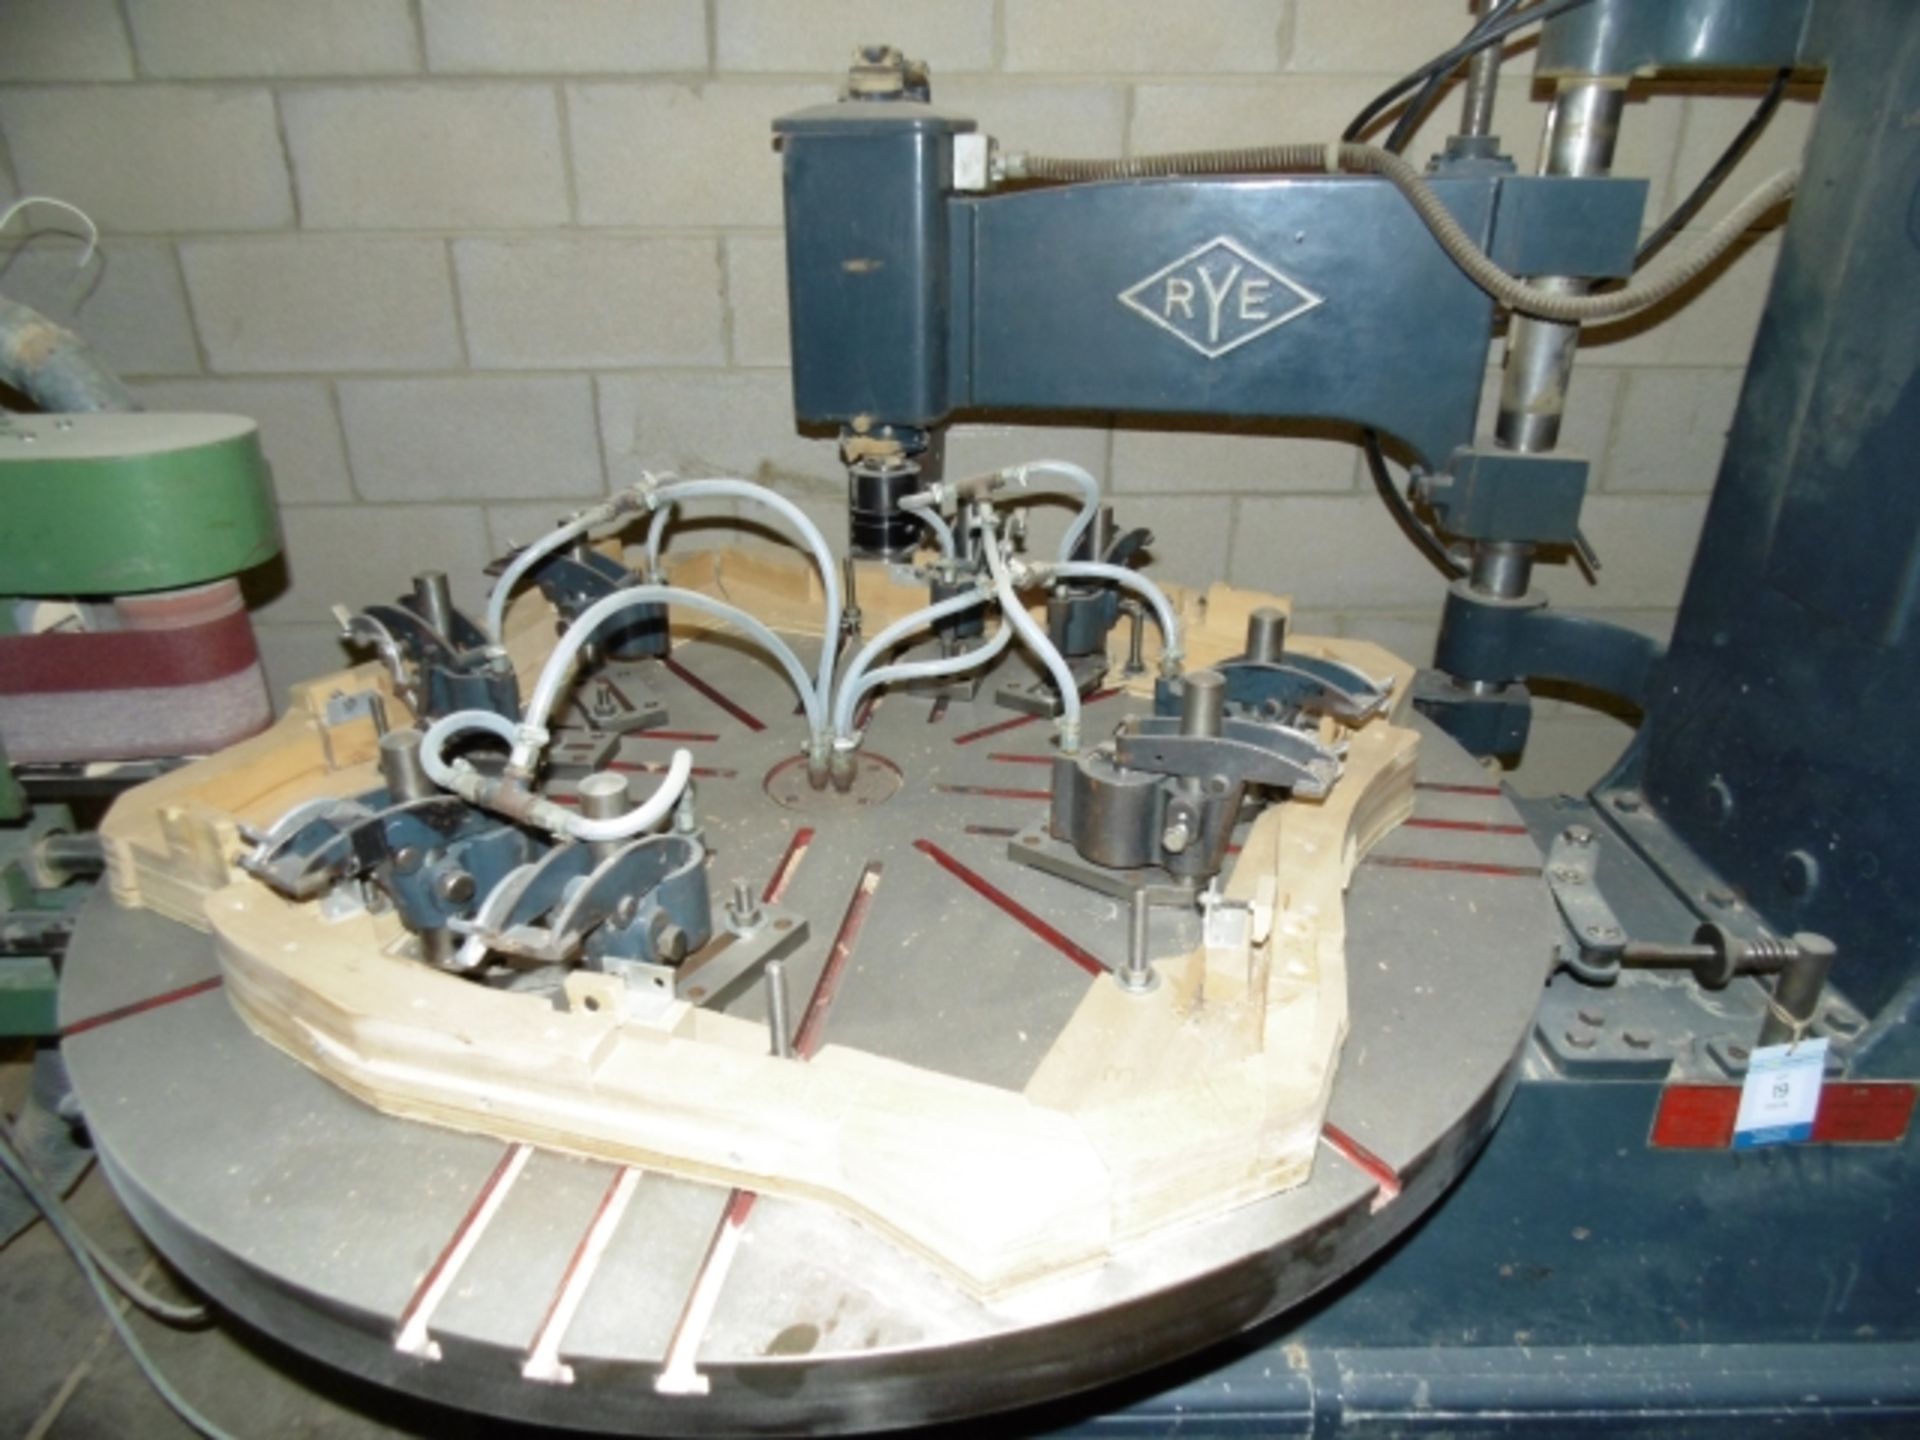 * Rye Engineering Model R52 Rotary Shaper with 8-Station Carousel and Belt Sander Attachment; 3 - Image 4 of 6